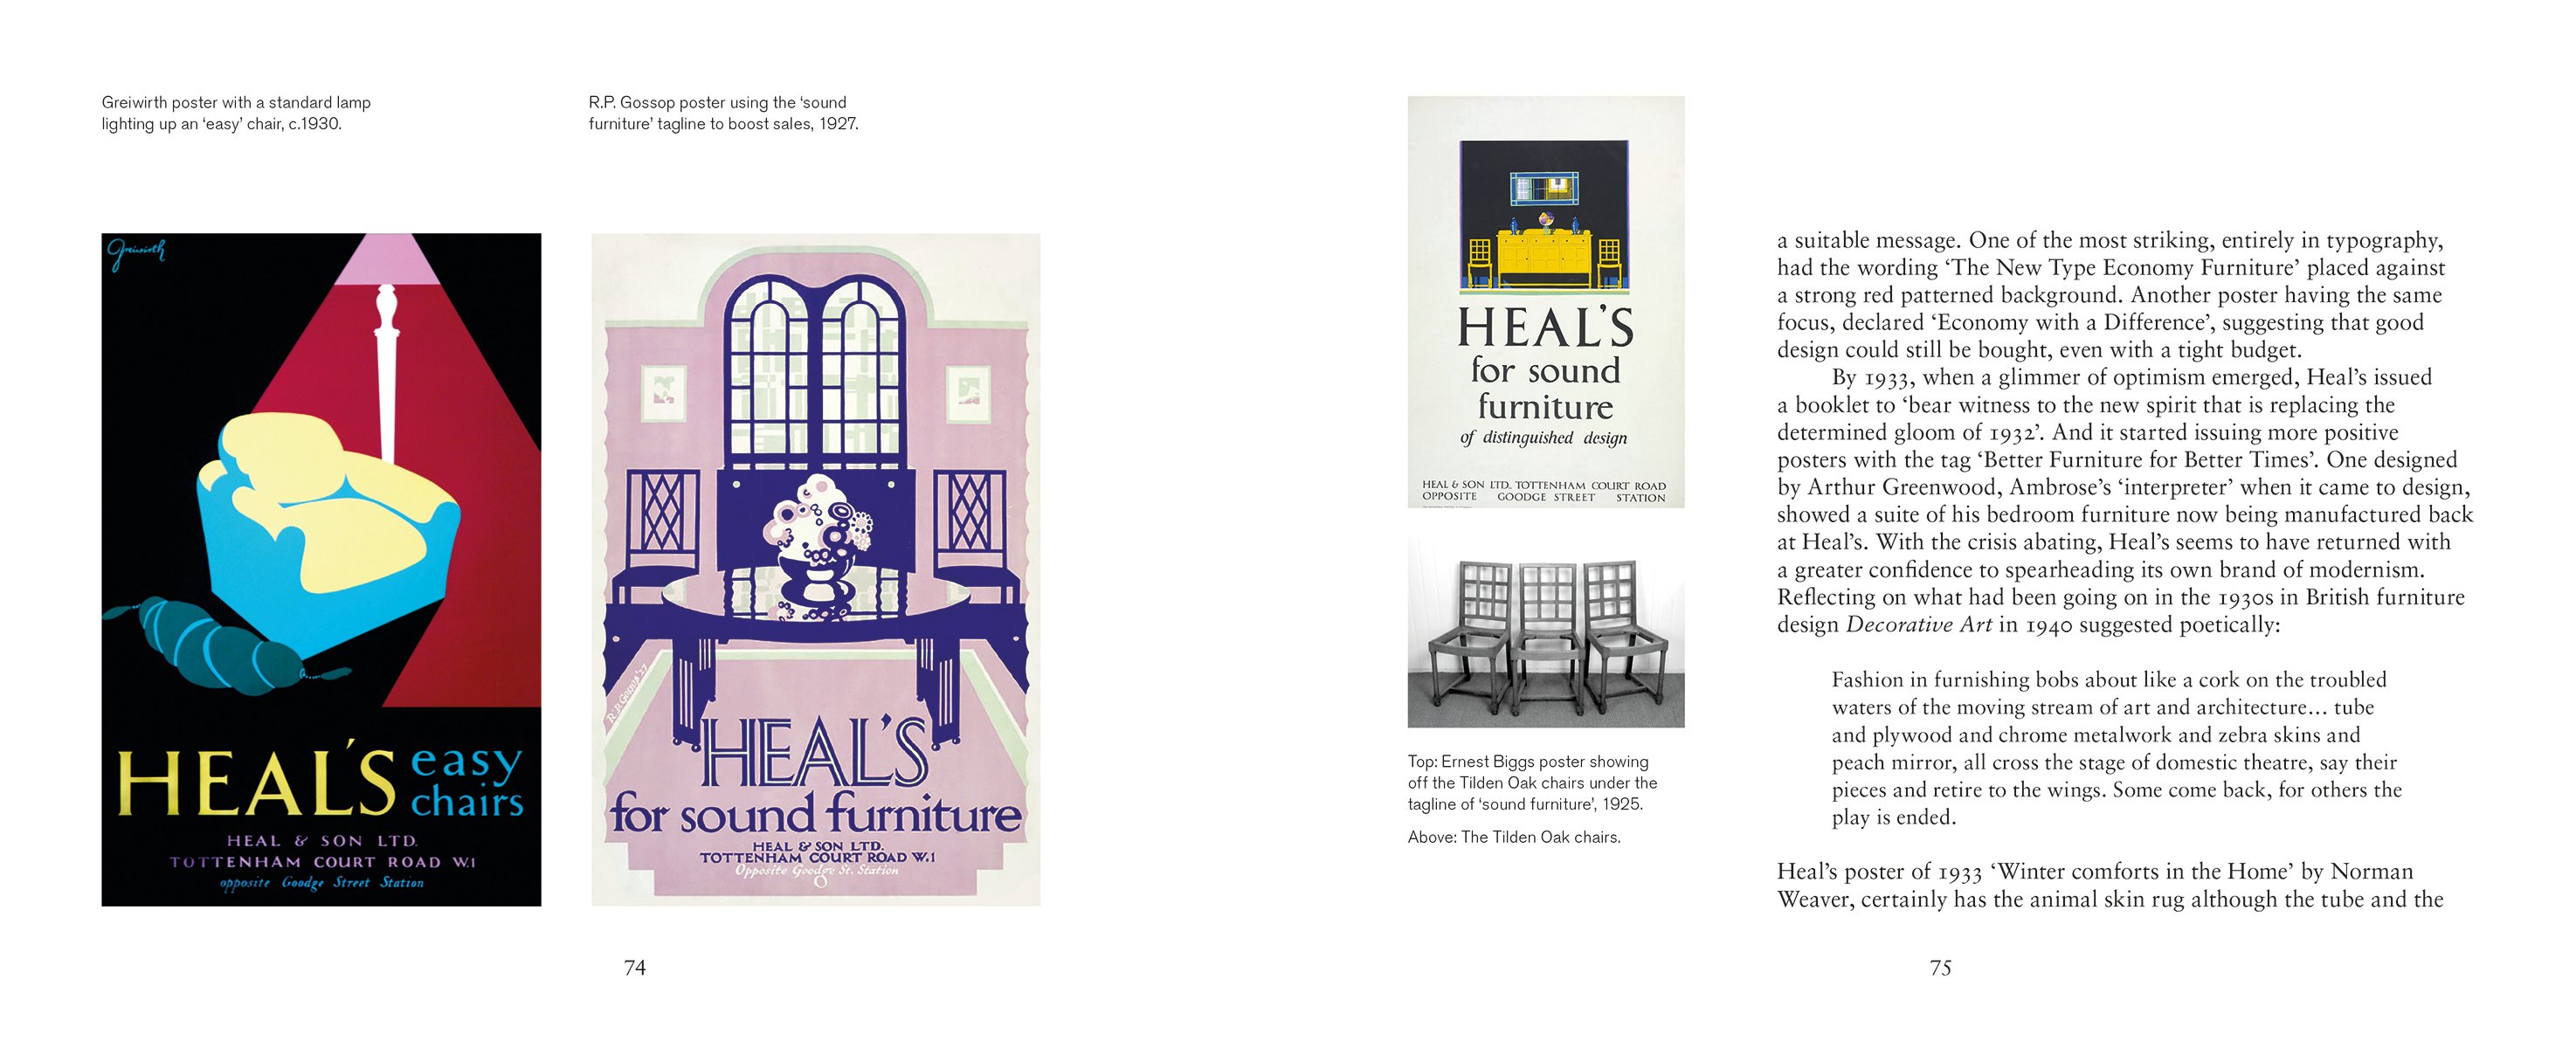 A circular formation letter h's in red and purple, Heal's Posters Advertising Modernism Ruth Artmonsky and Stella Harpley in grey font, white cover.